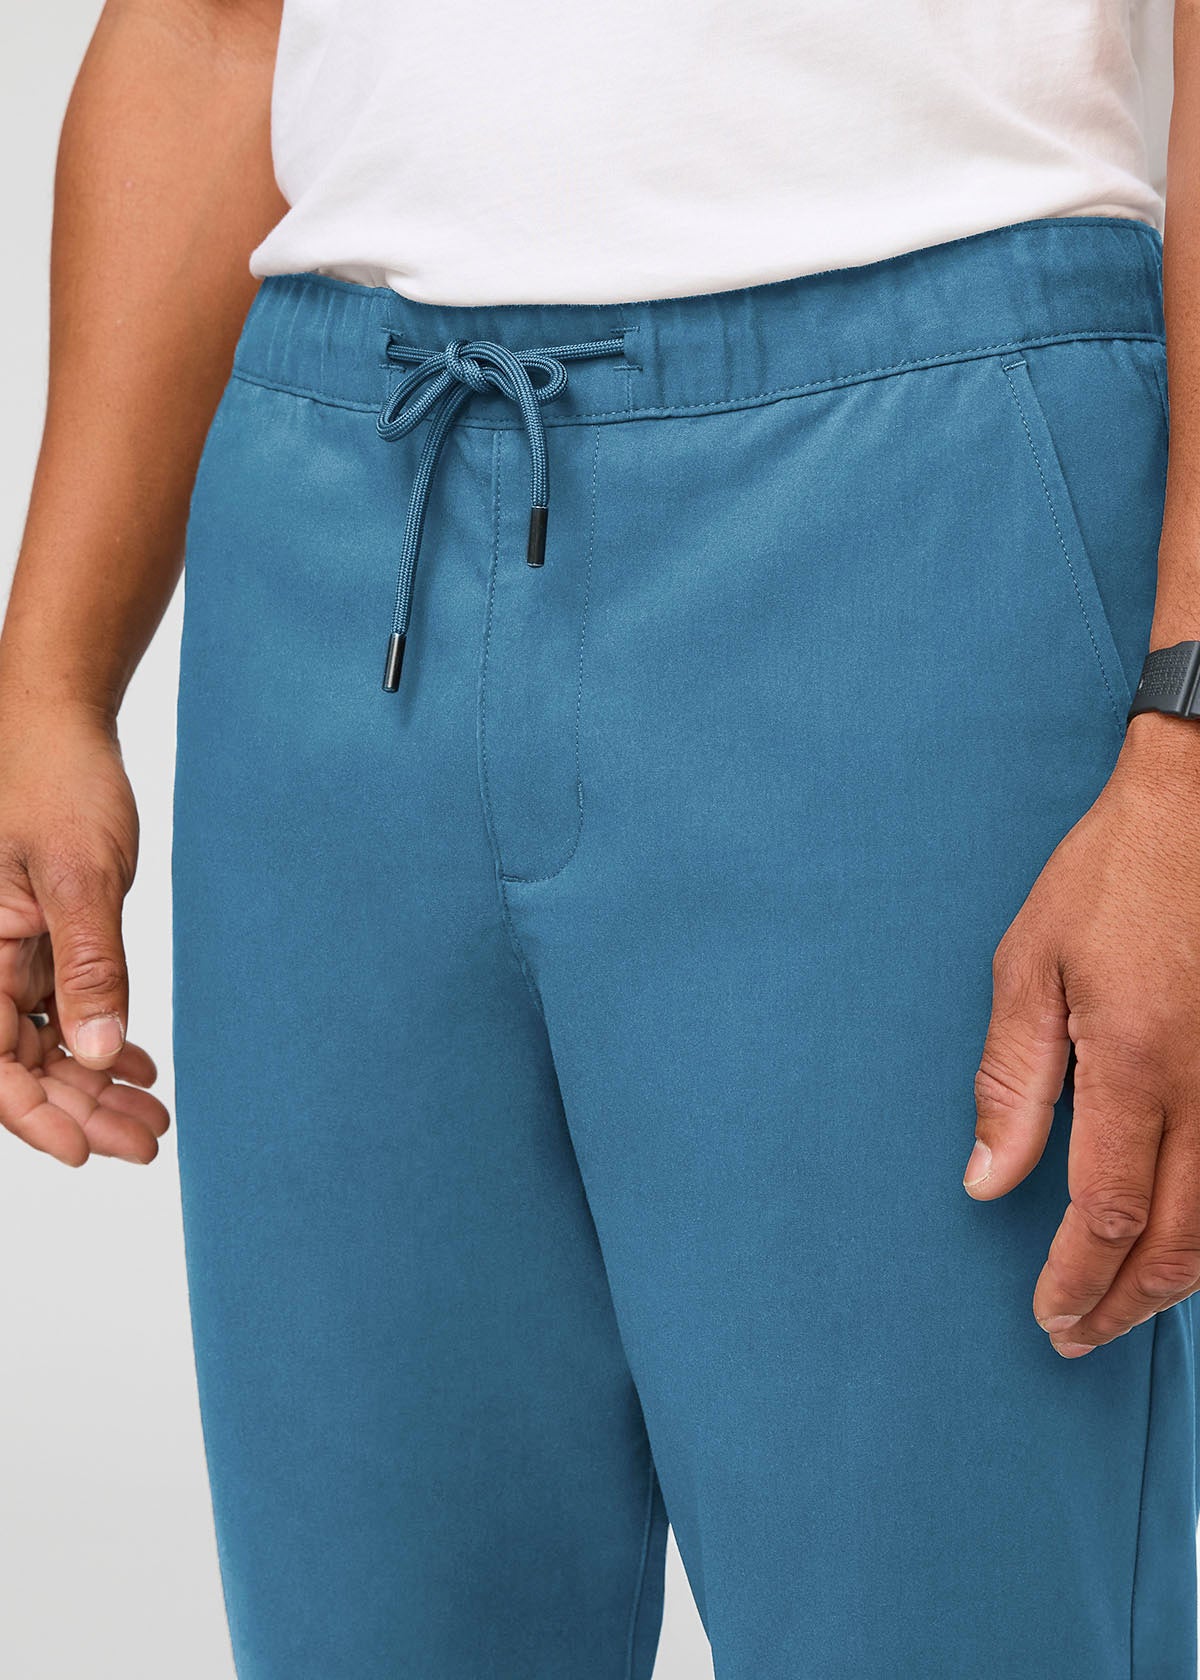 mens blue athleisure jogger front waistband detail